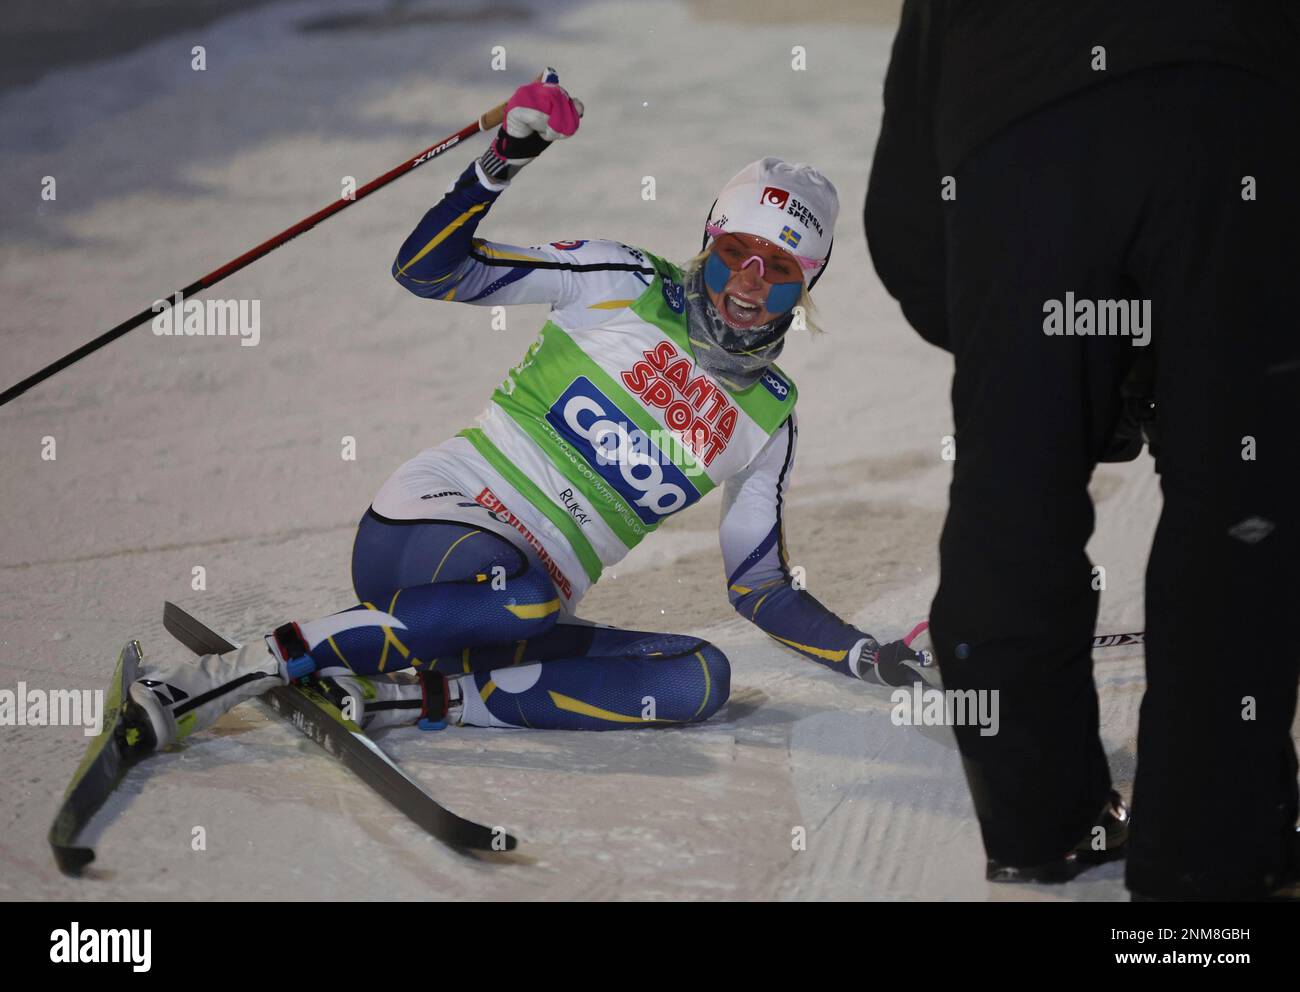 KARLSSON Frida of Sweden reacts as she wins the womens 10 km Cross-Country Skiing World Cup at the Ruka ski resort in Kuusamo, Finland on Nov